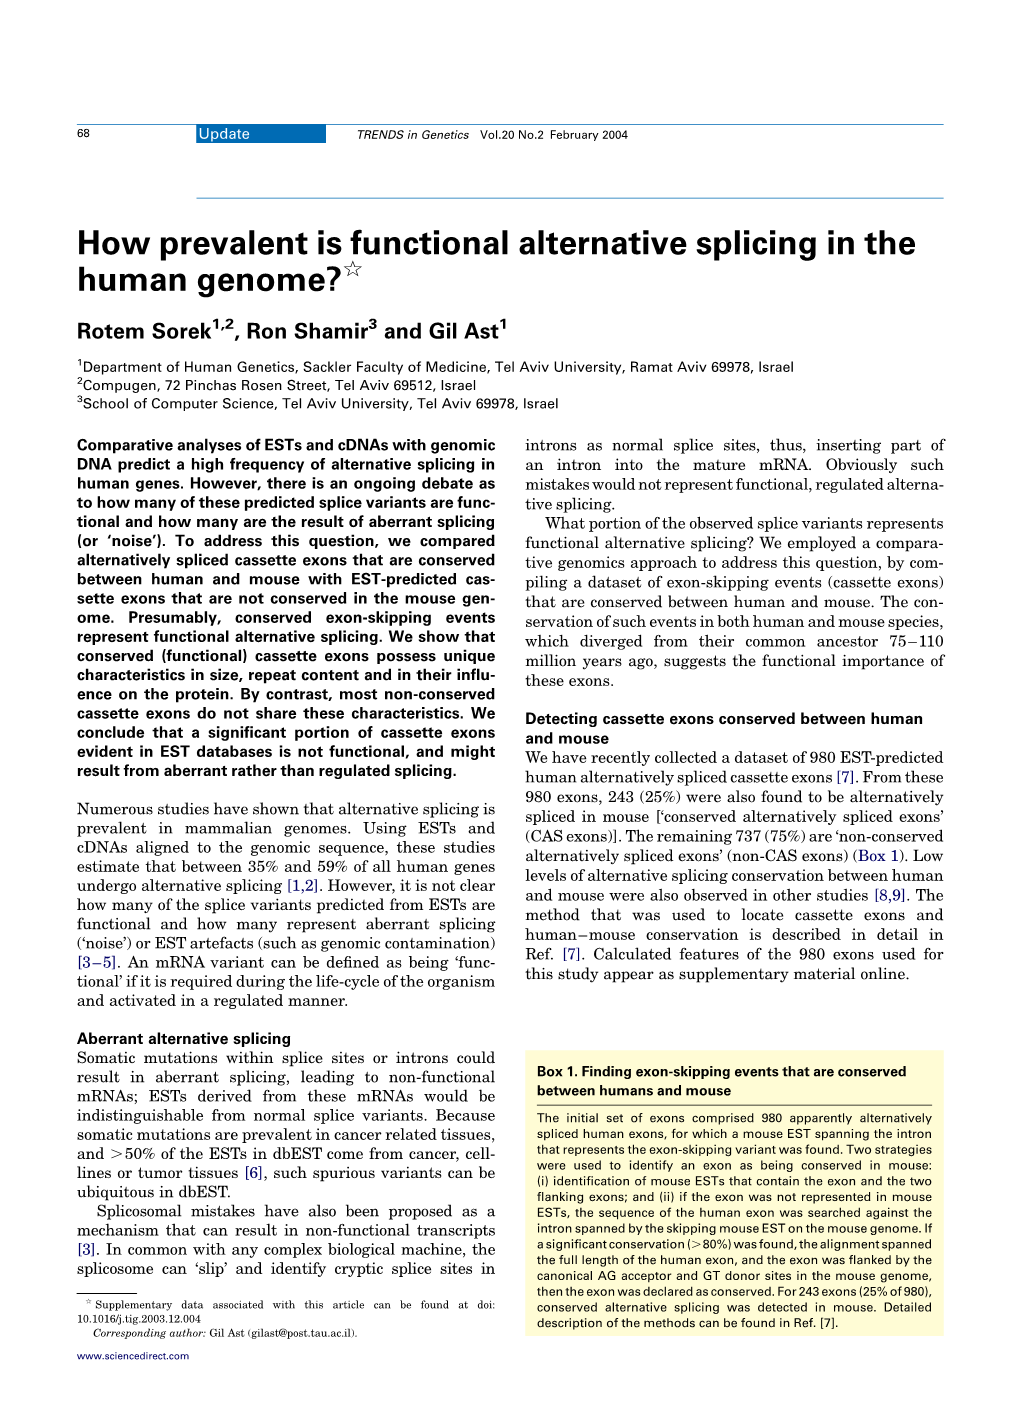 How Prevalent Is Functional Alternative Splicing in the Human Genome?Q